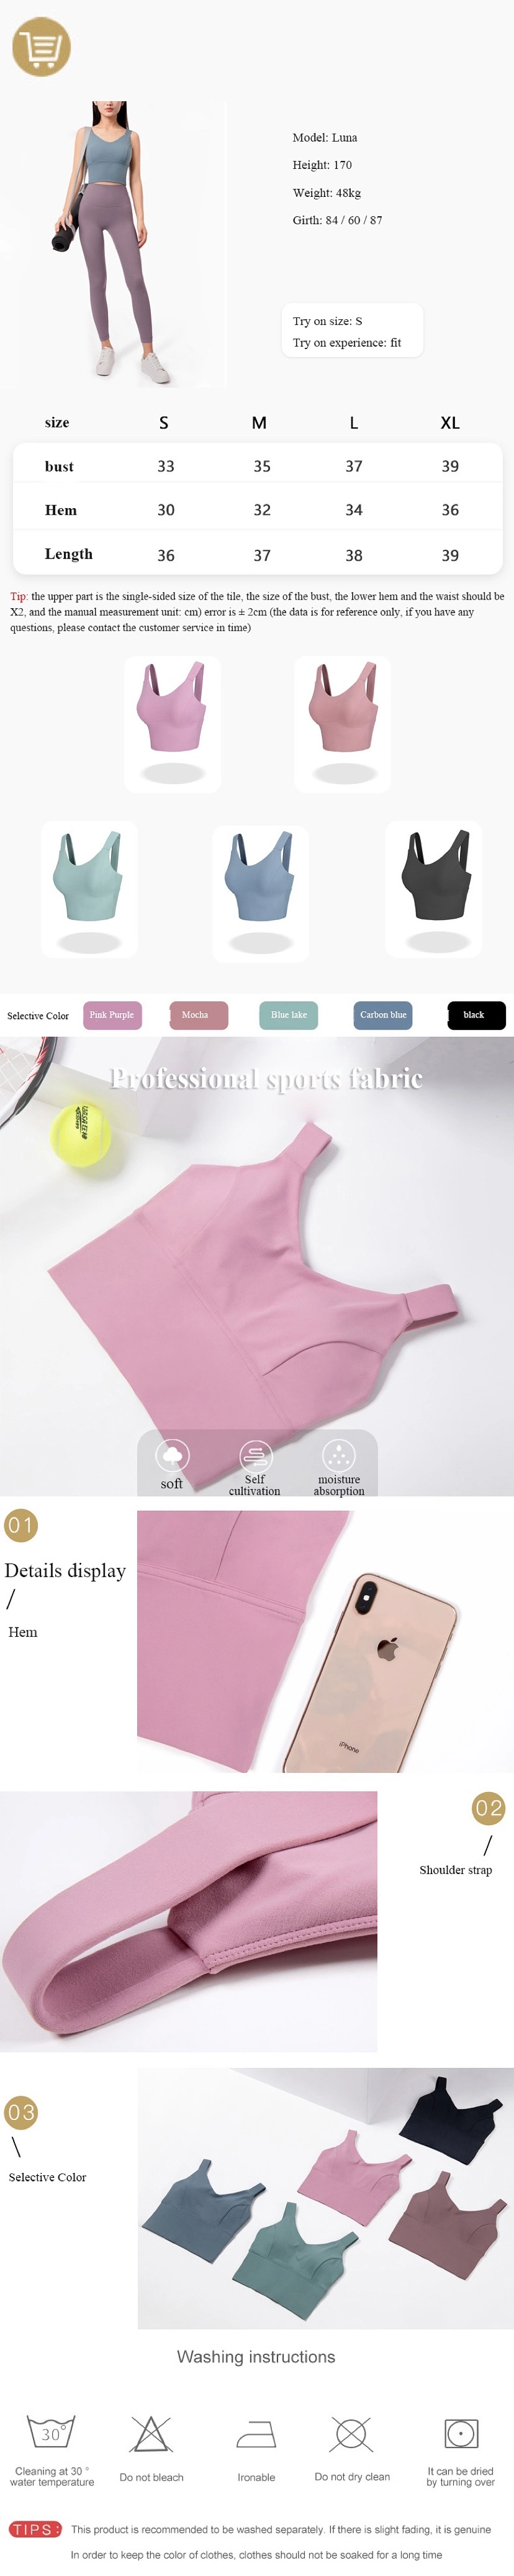 2021 New Shockproof Sports Vest European and American Style High Strength Nude Sports Underwear Women